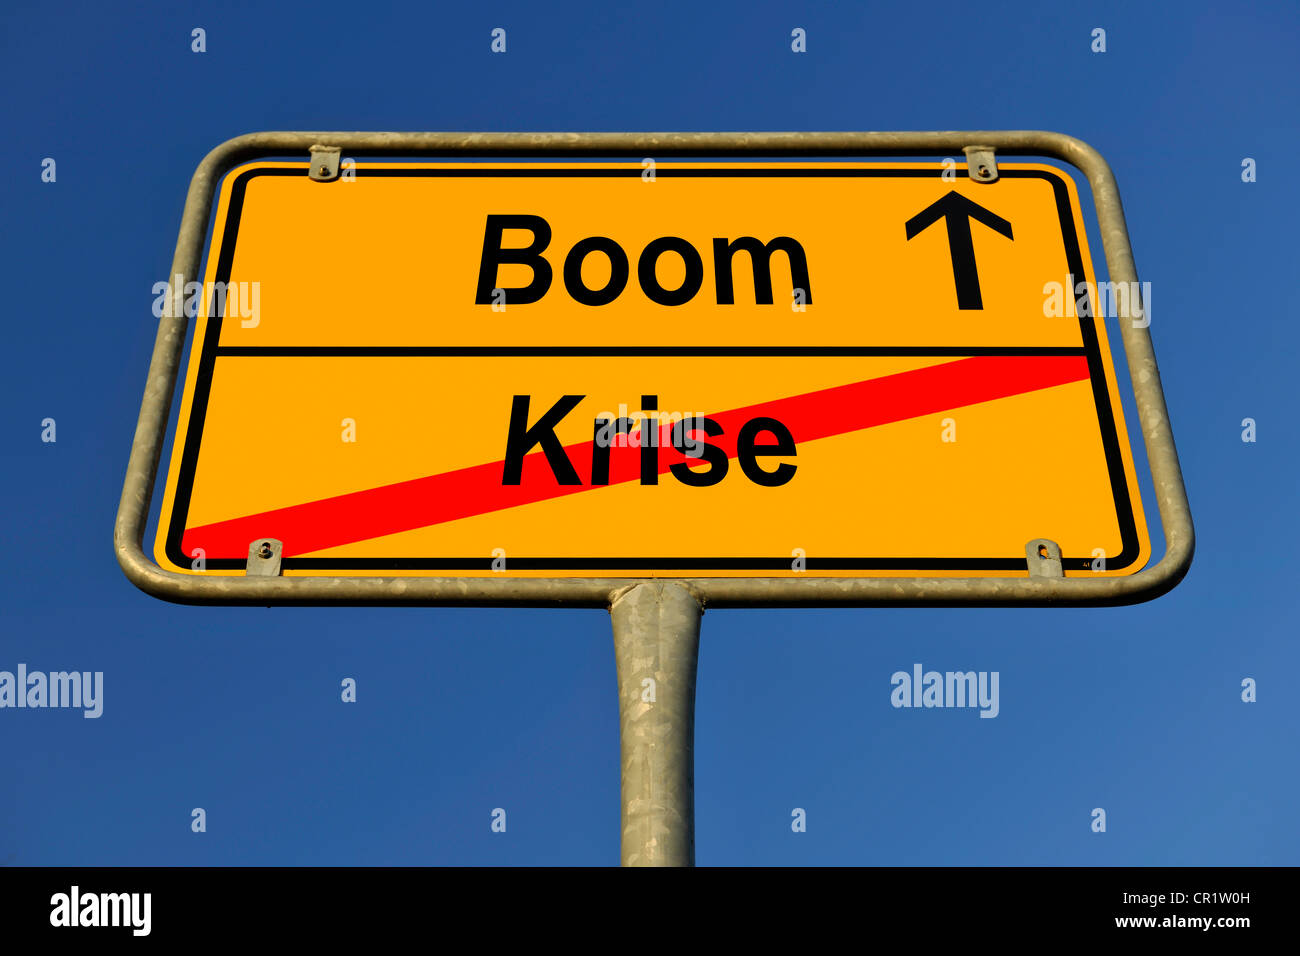 City limit sign, symbolic image for the way from a Krise to a Boom, German for going from an economic crisis to an economic boom Stock Photo